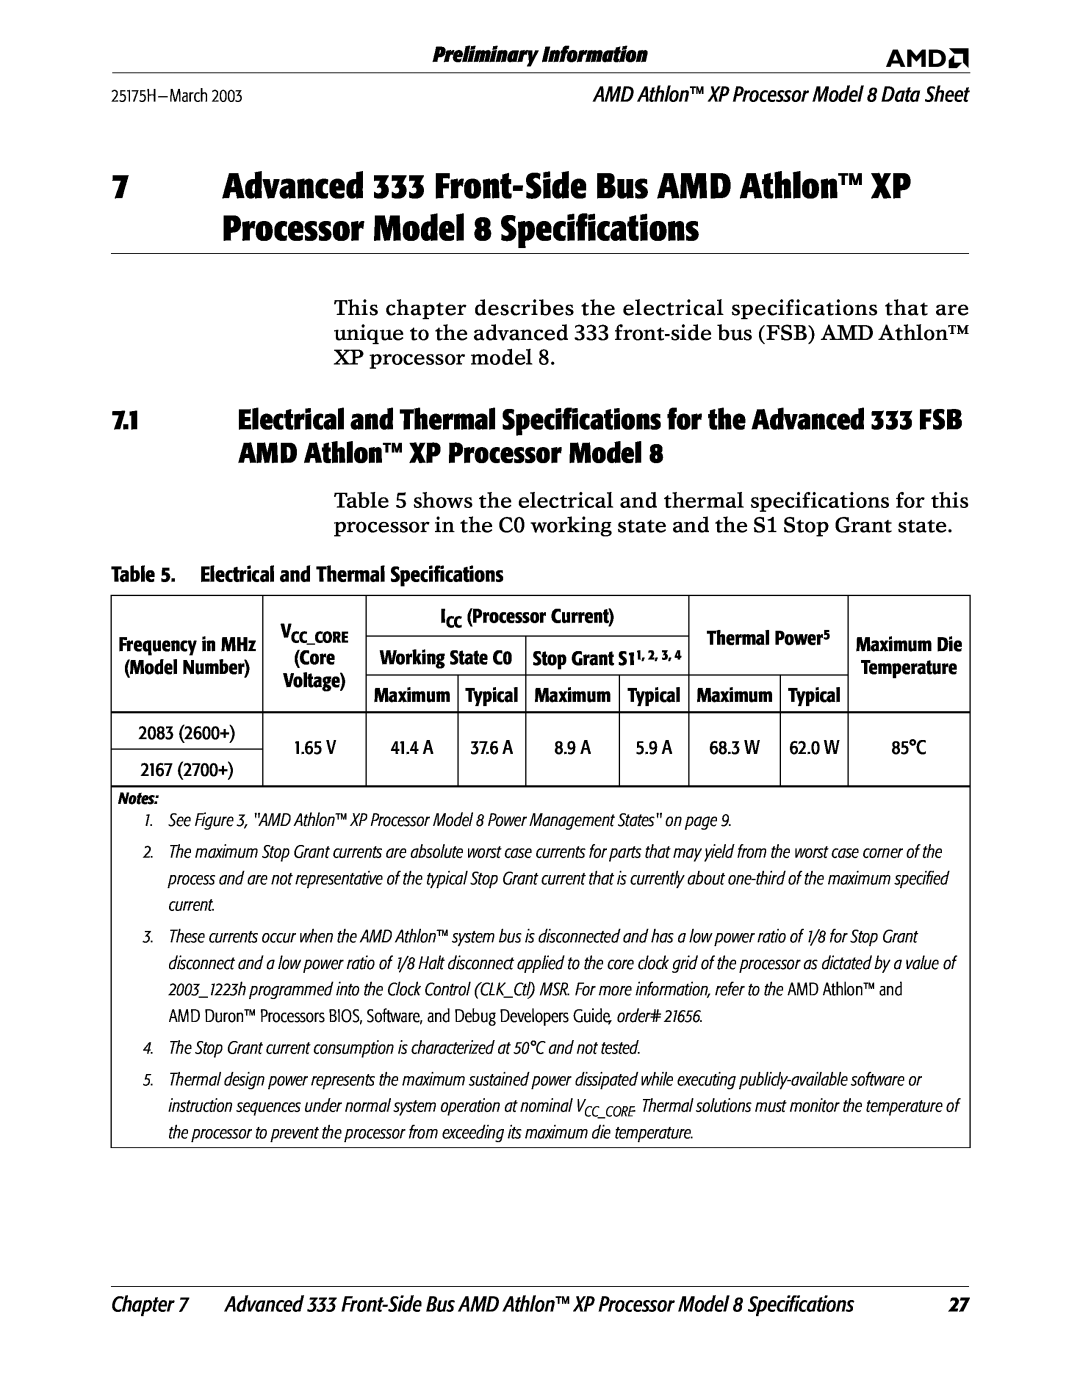 AMD 8 manual Electrical and Thermal Specifications, Preliminary Information, Chapter, 62.0 W 